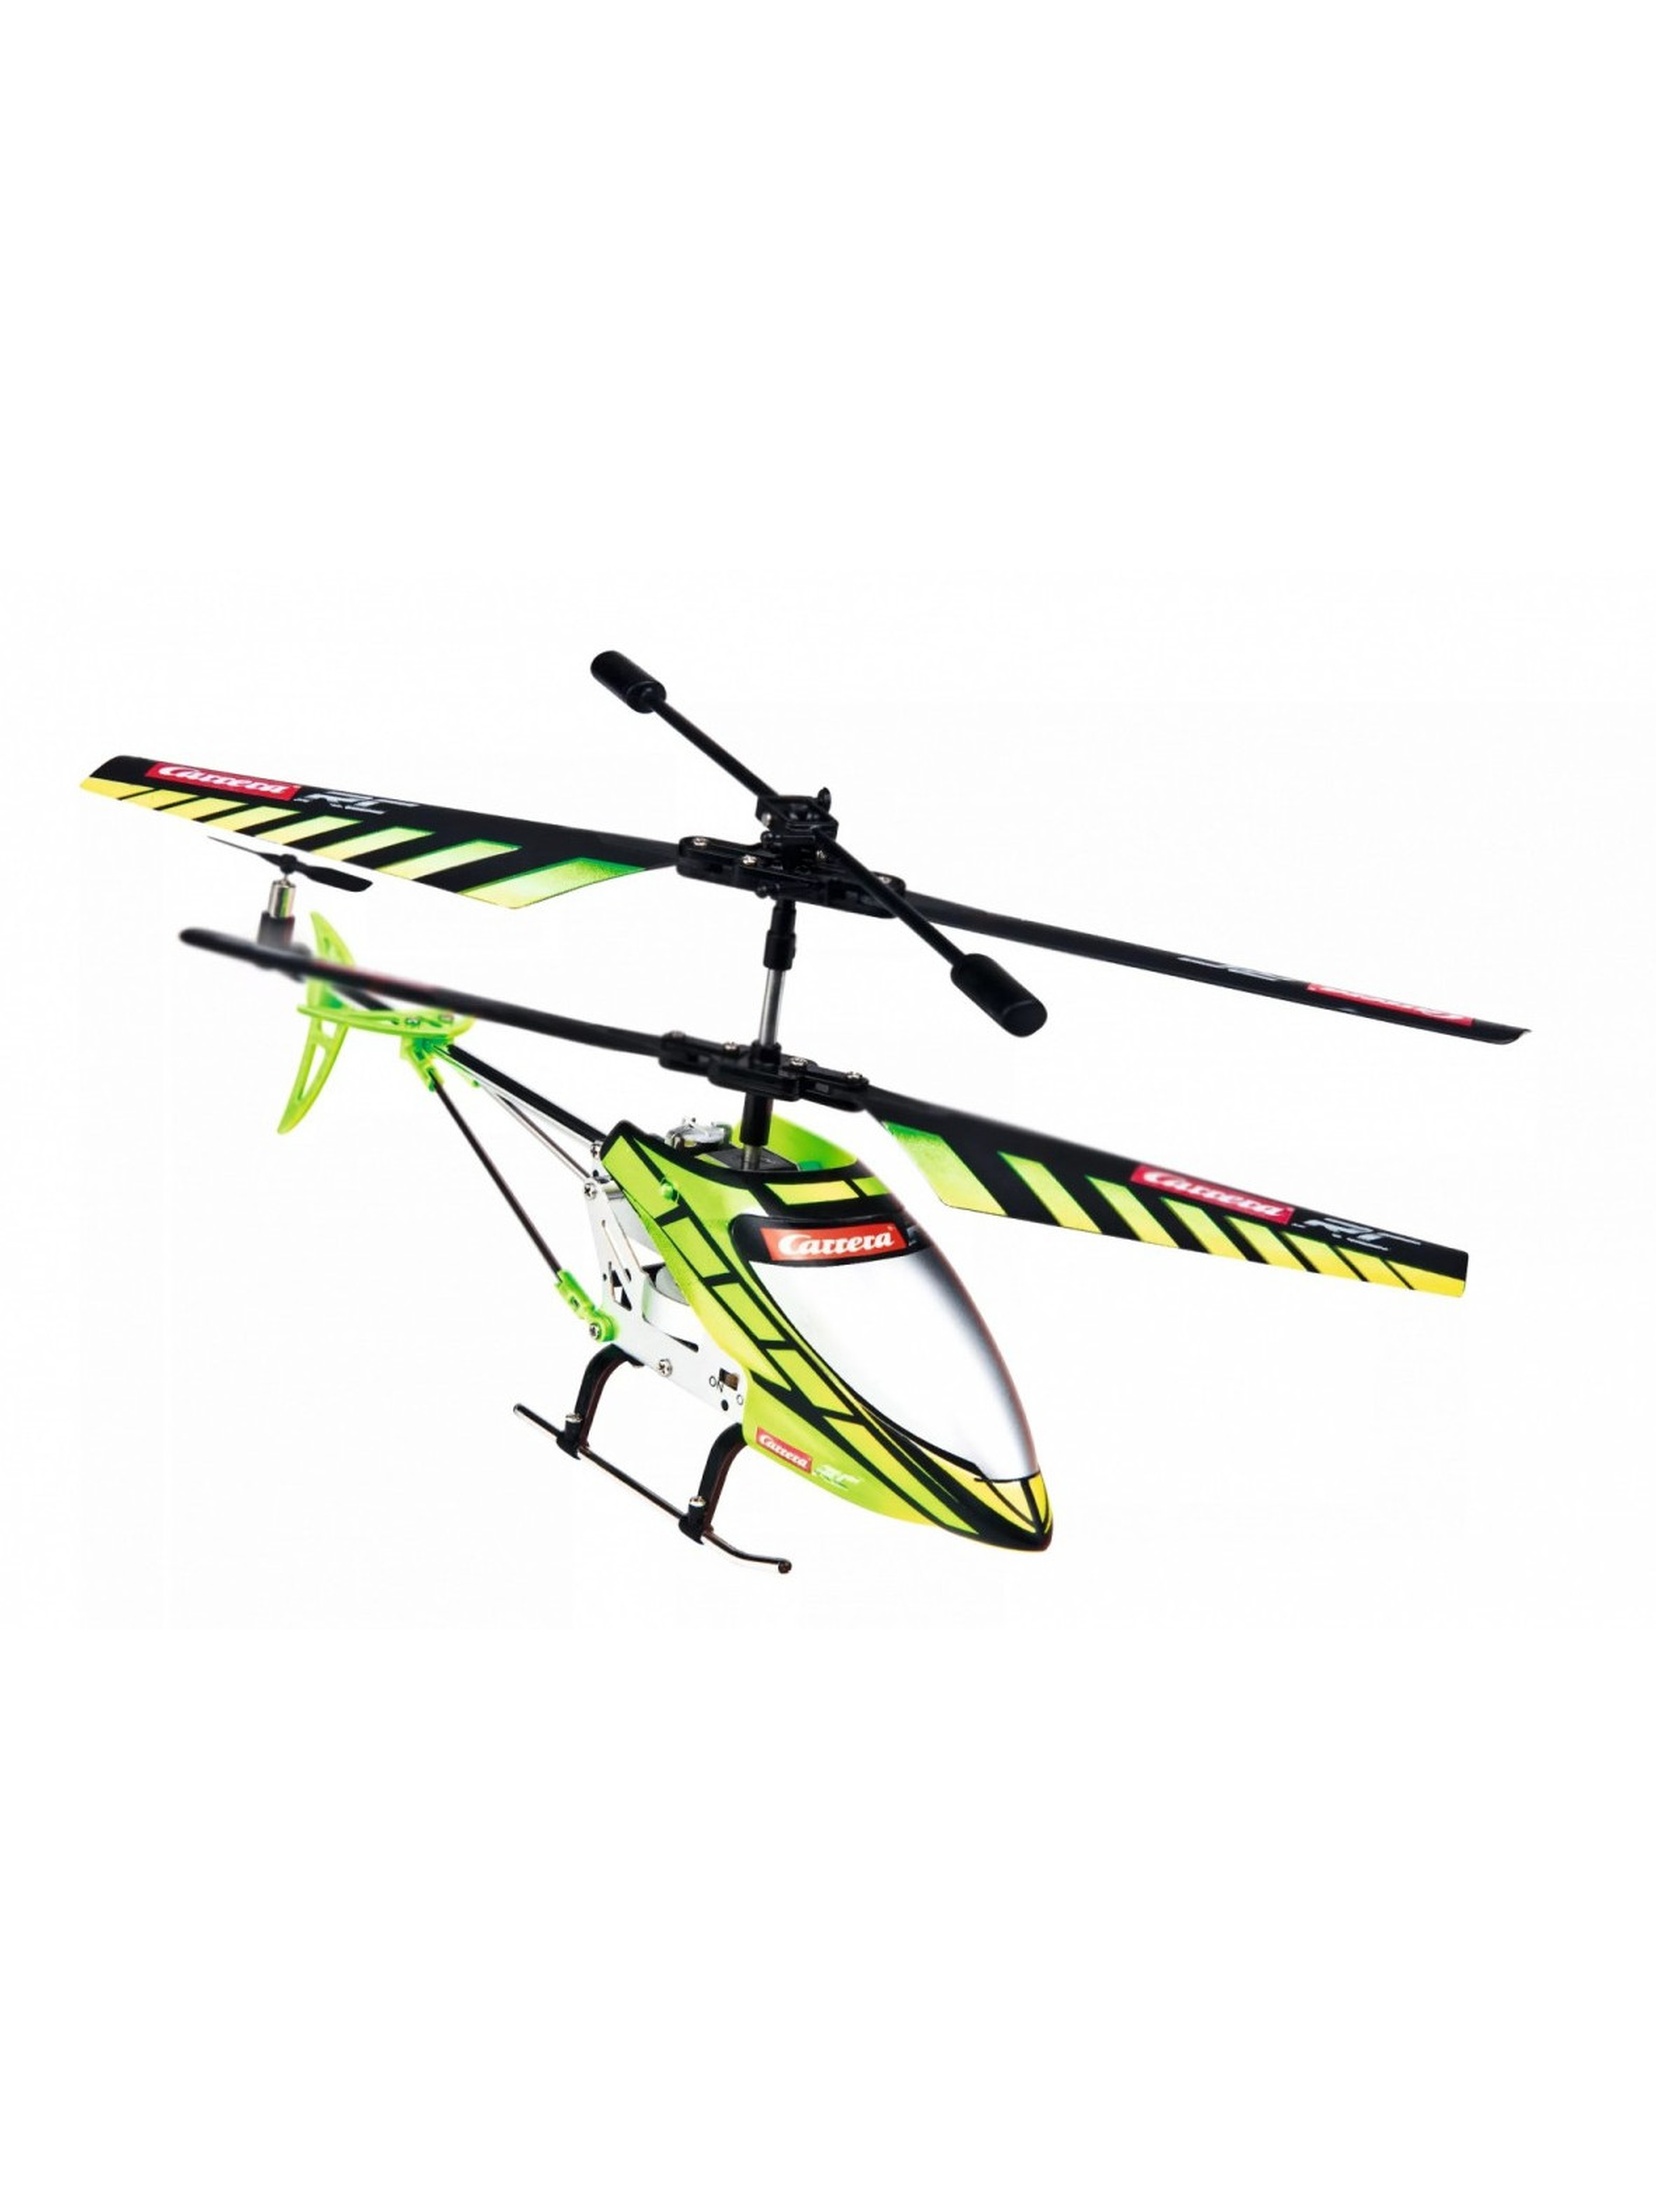 Helikopter RC Green Chopper 2.0 2,4GHz